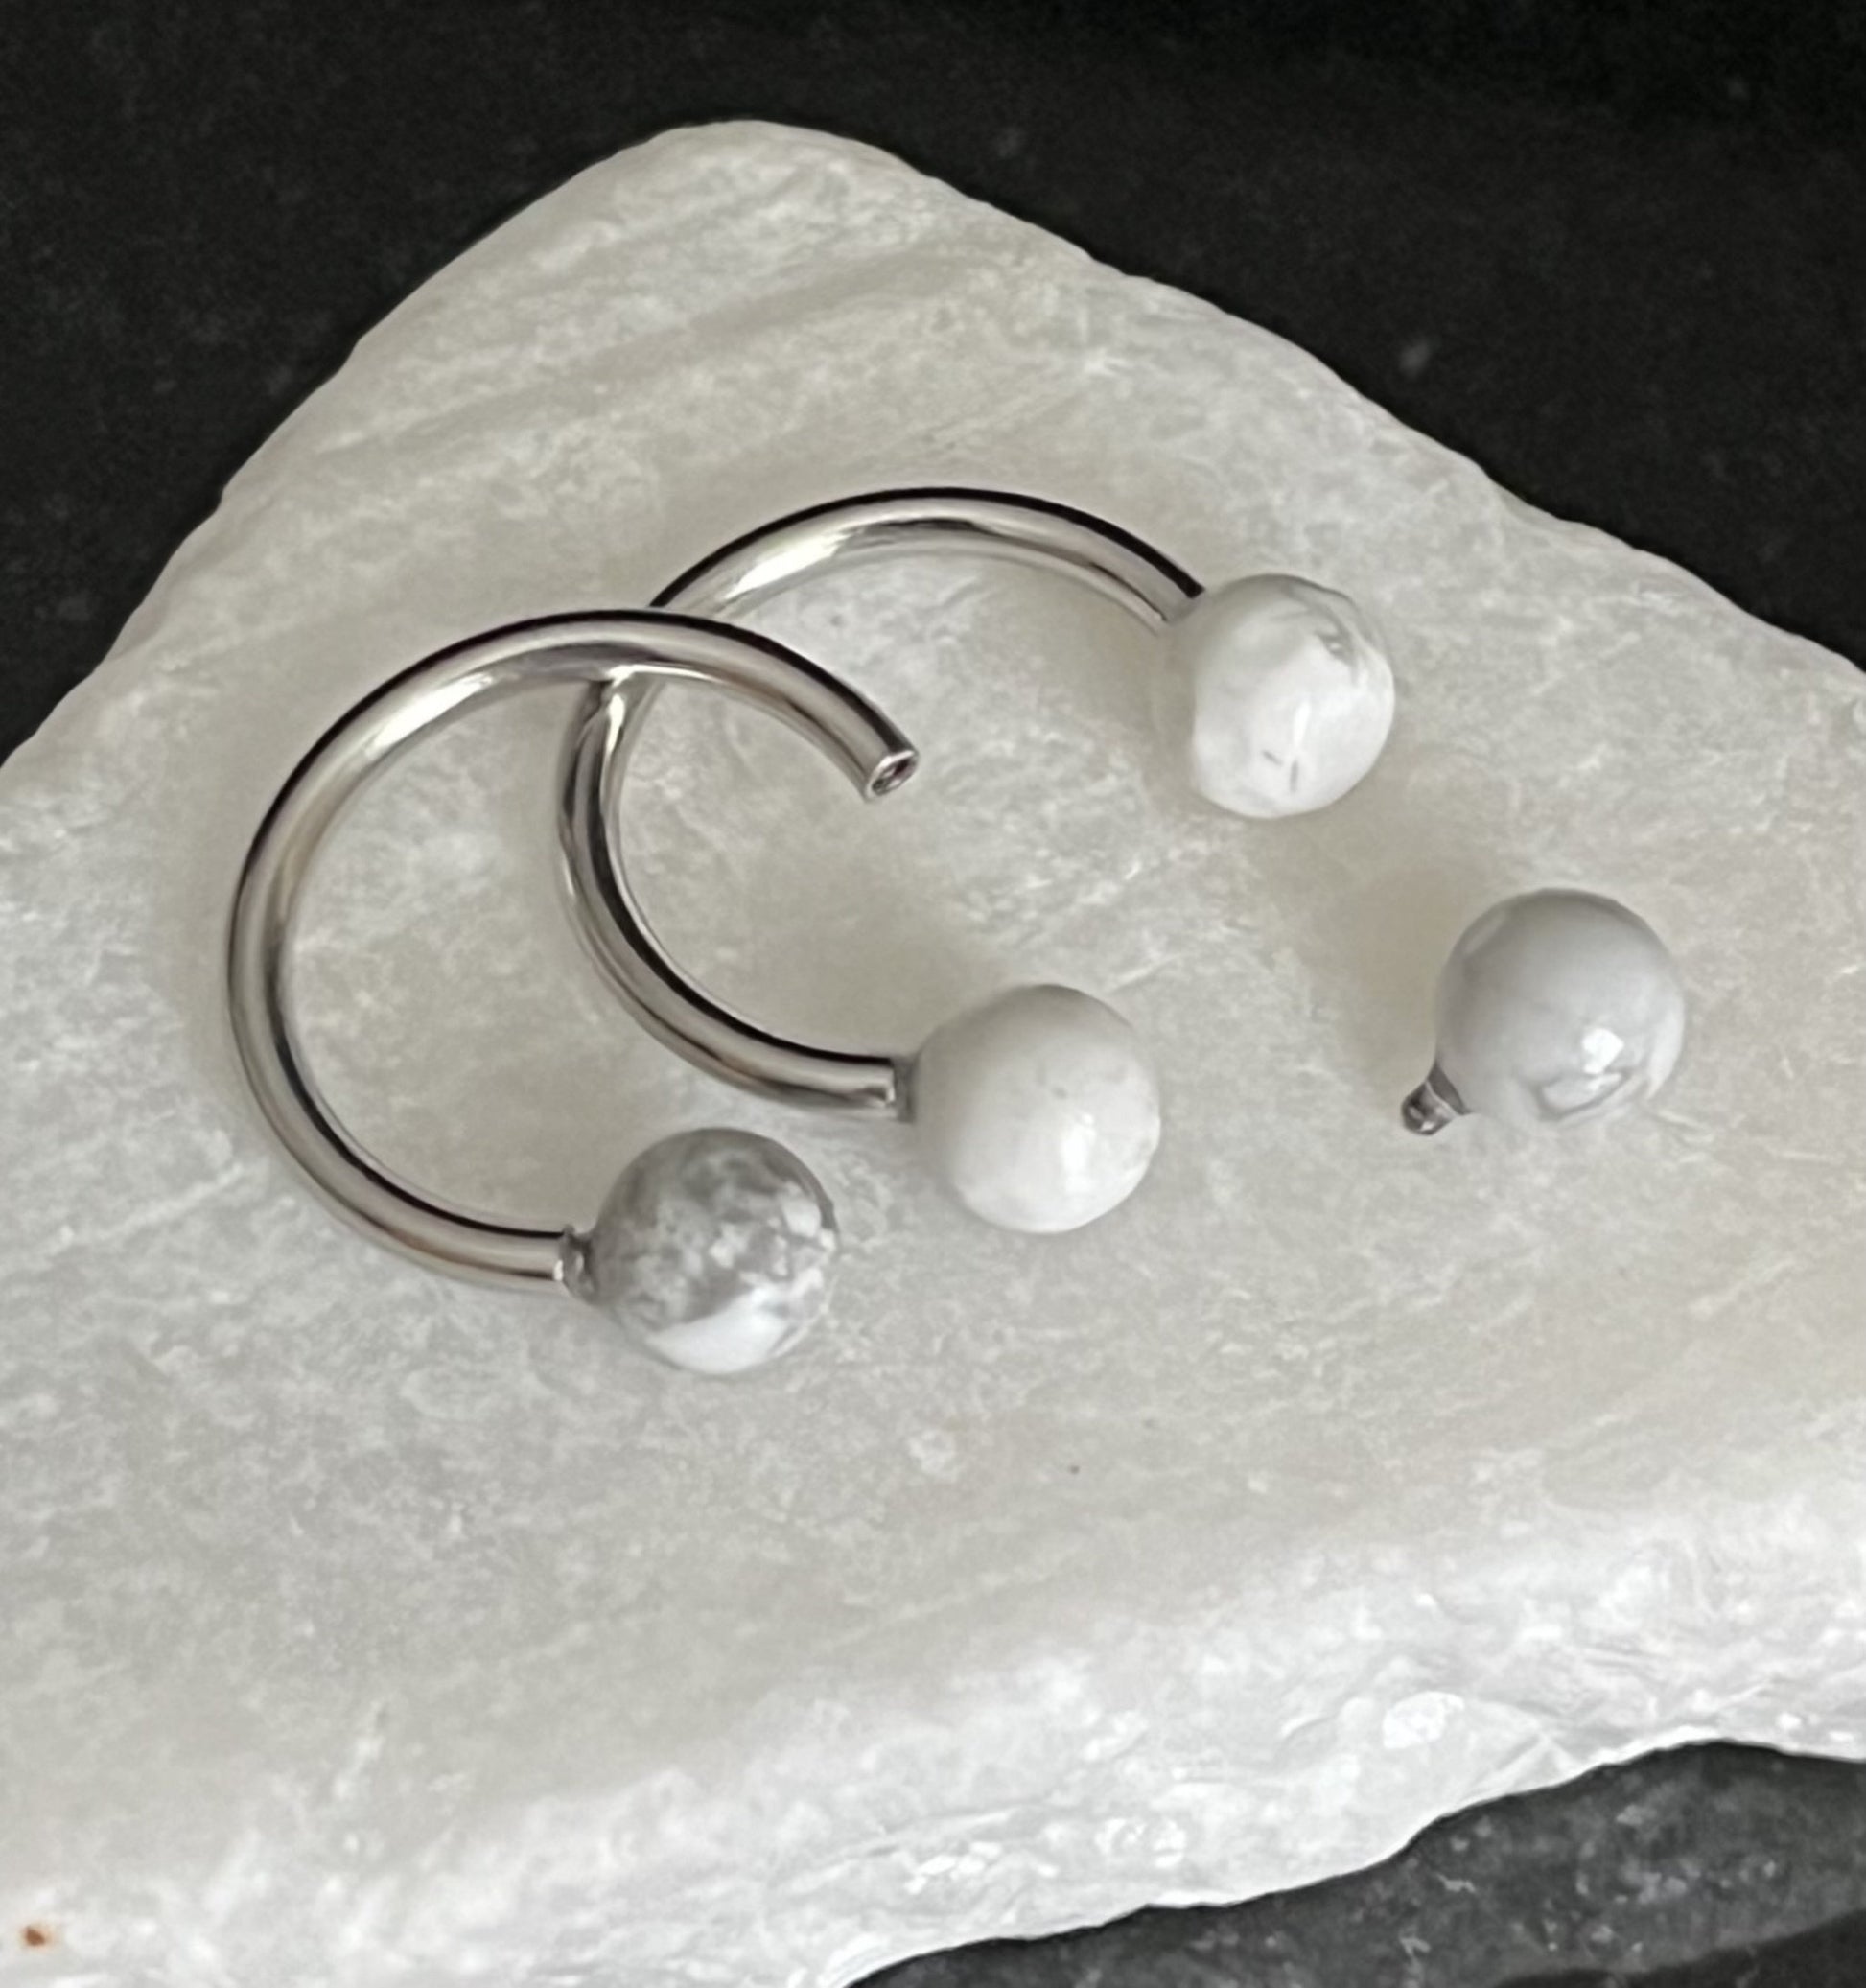 1 Piece of Stunning Semi Precious Stone Circular Internally Threaded Barbell Septum Ring - 16g - 8mm - You Choose Your Listed Stone!